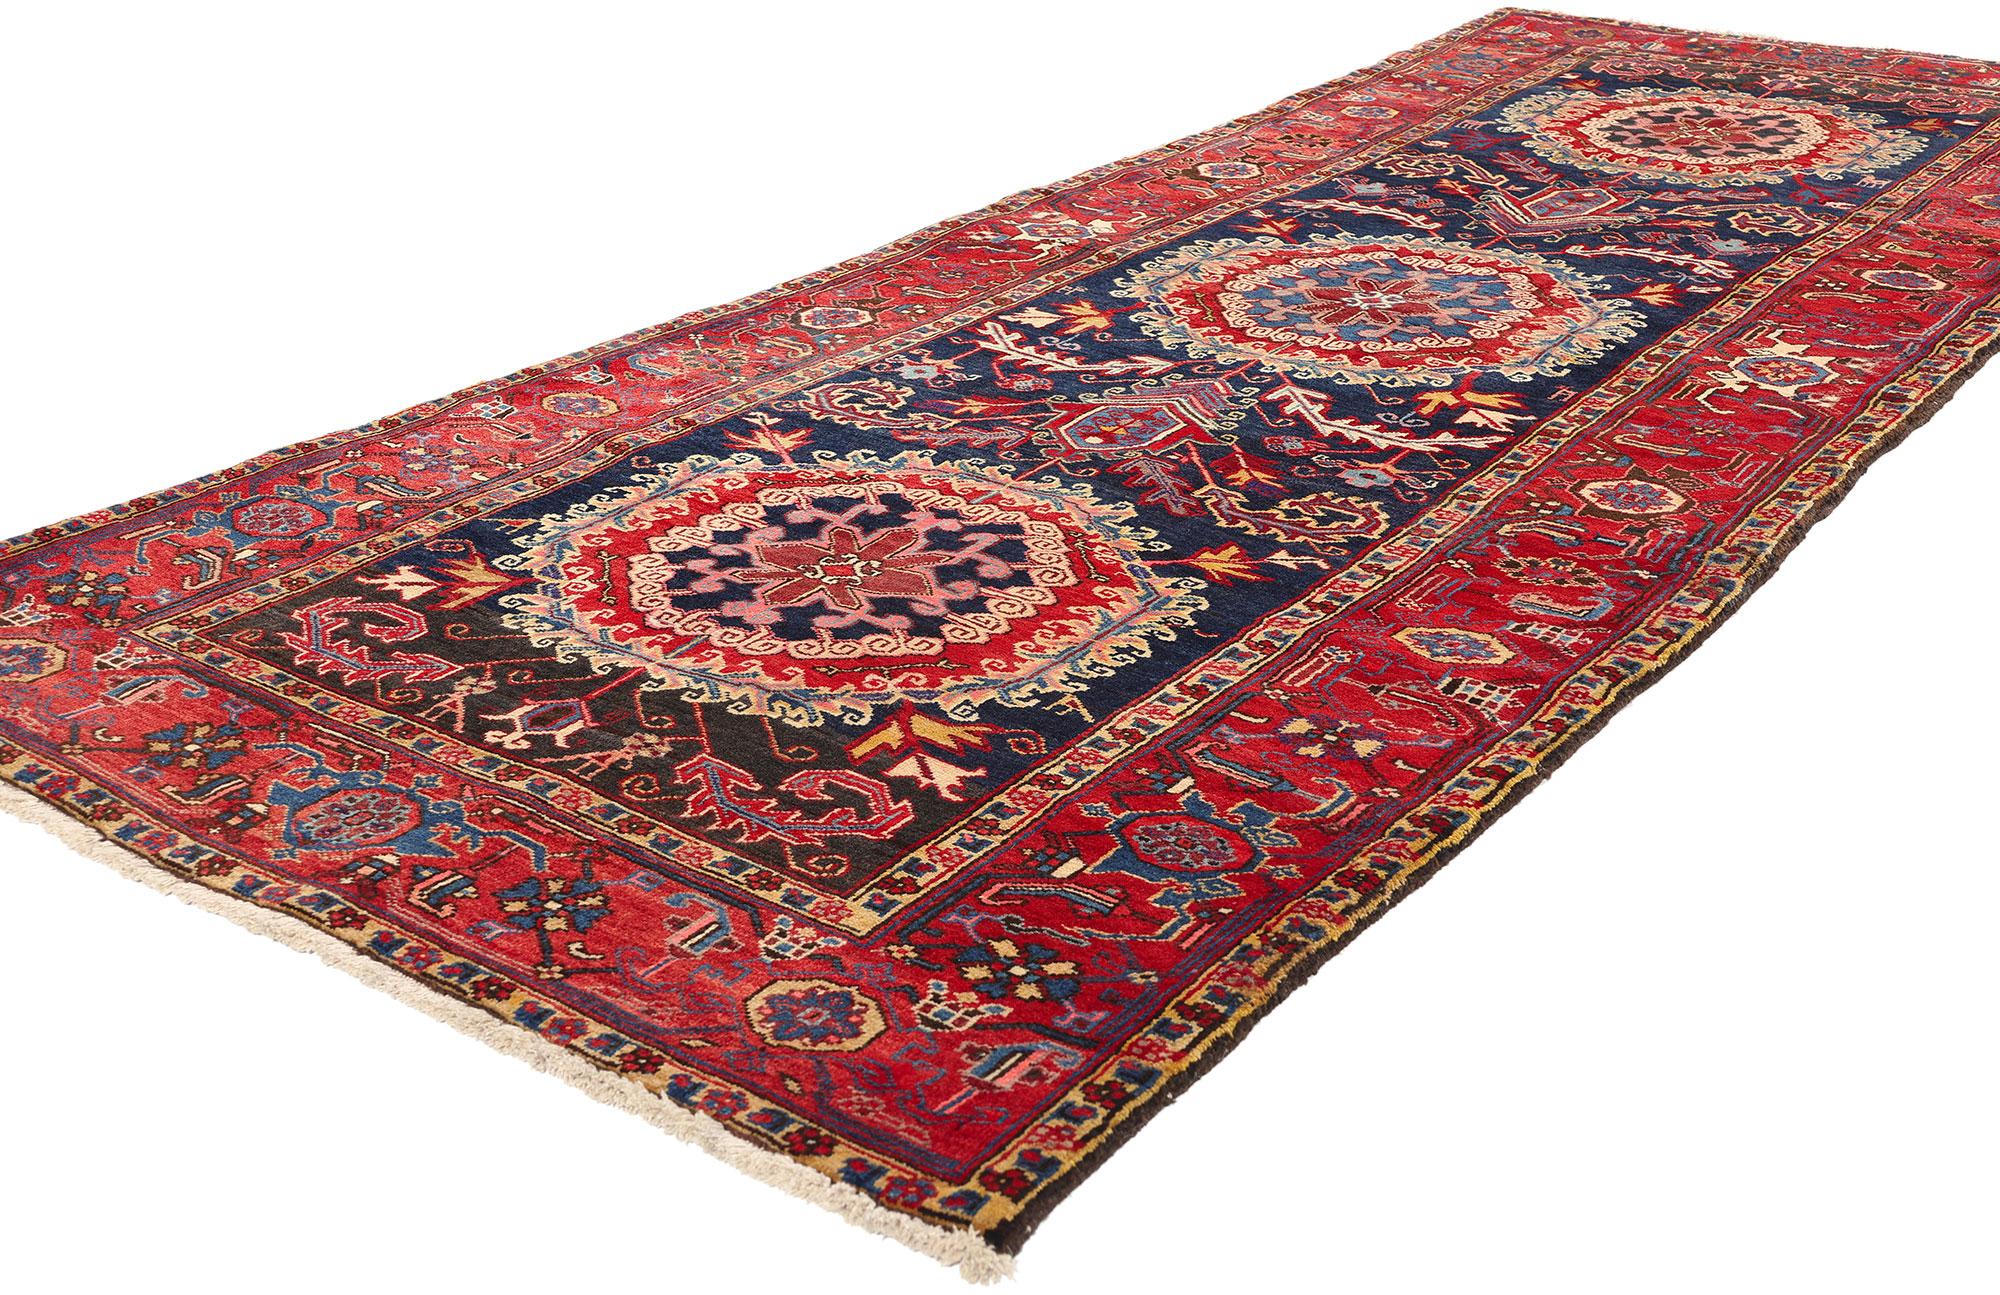 76842 Vintage Persian Heriz Rug Runner, 03'10 x 10'04. Persian Heriz carpet runners are a specific type of Heriz rug crafted in a long and narrow format, ideal for adorning hallways, staircases, and other narrow spaces in the home. Like traditional